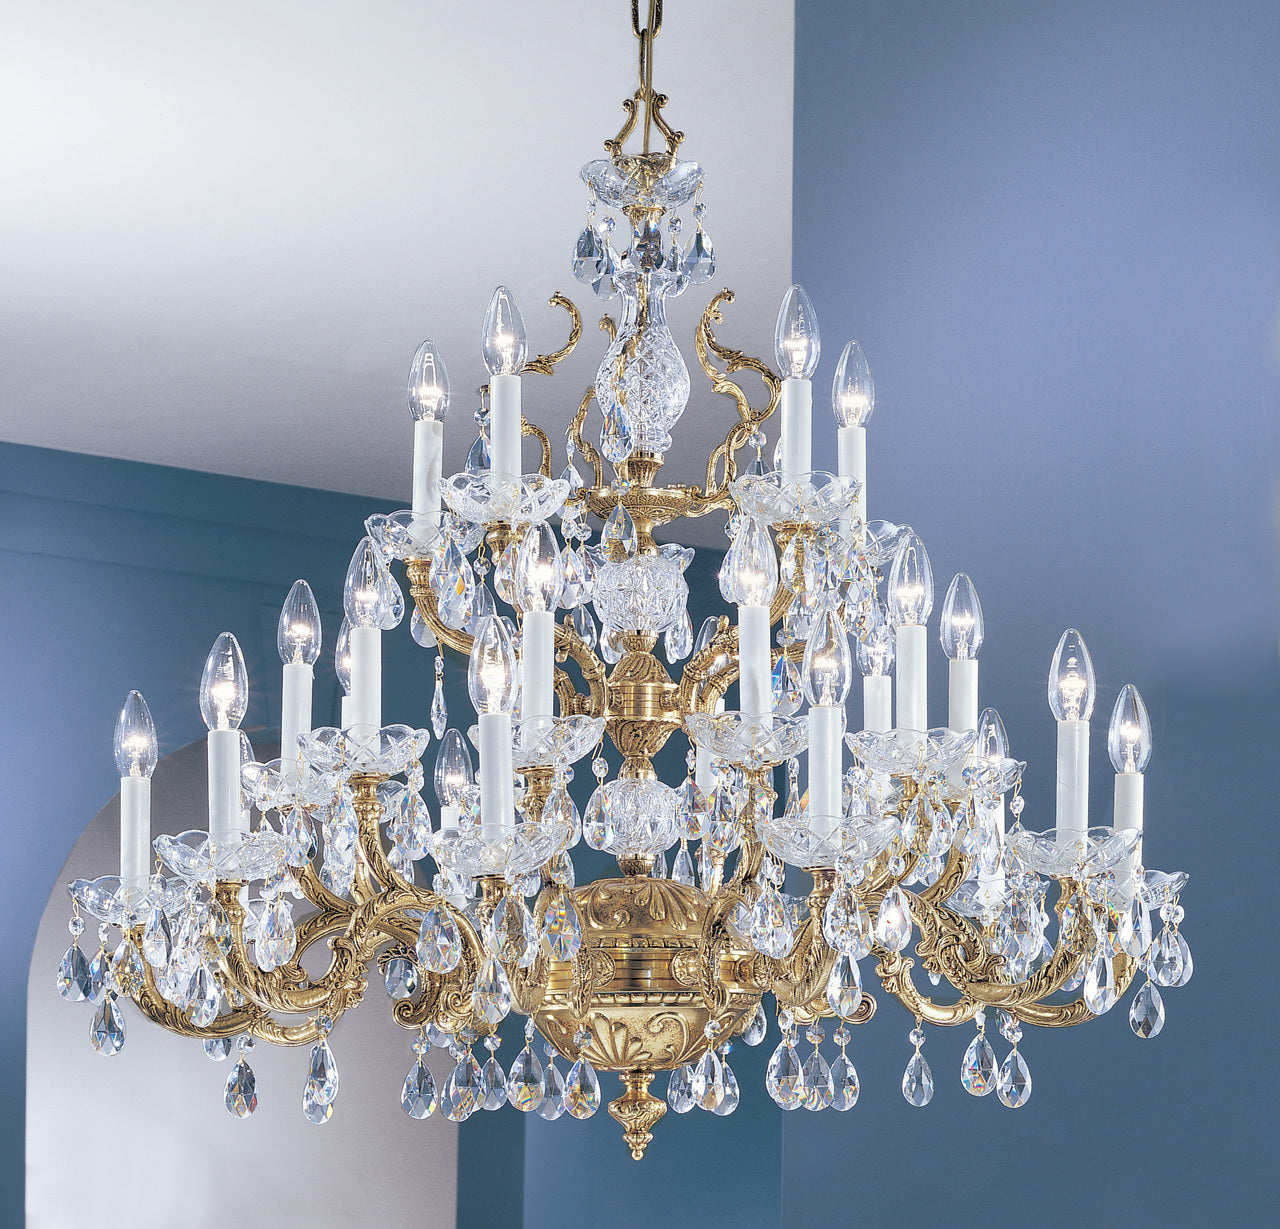 Classic Lighting 5535 RB S Madrid Crystal/Cast Brass Chandelier in Roman Bronze (Imported from Spain)